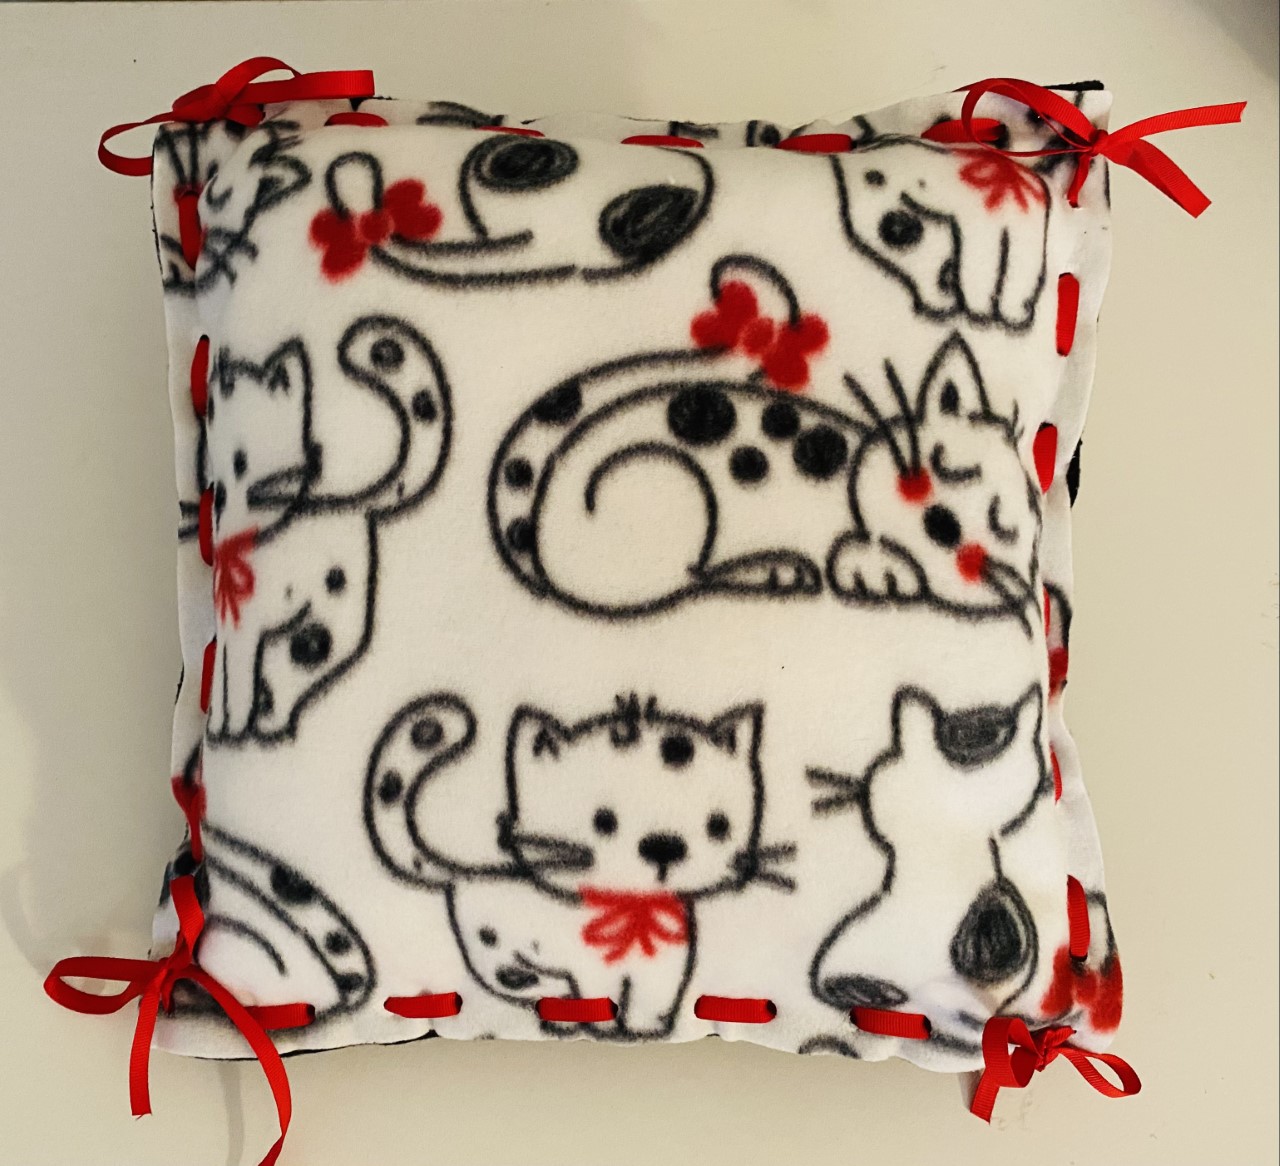 Kitten fleece pillow with white background and black sketched kittens with red bows